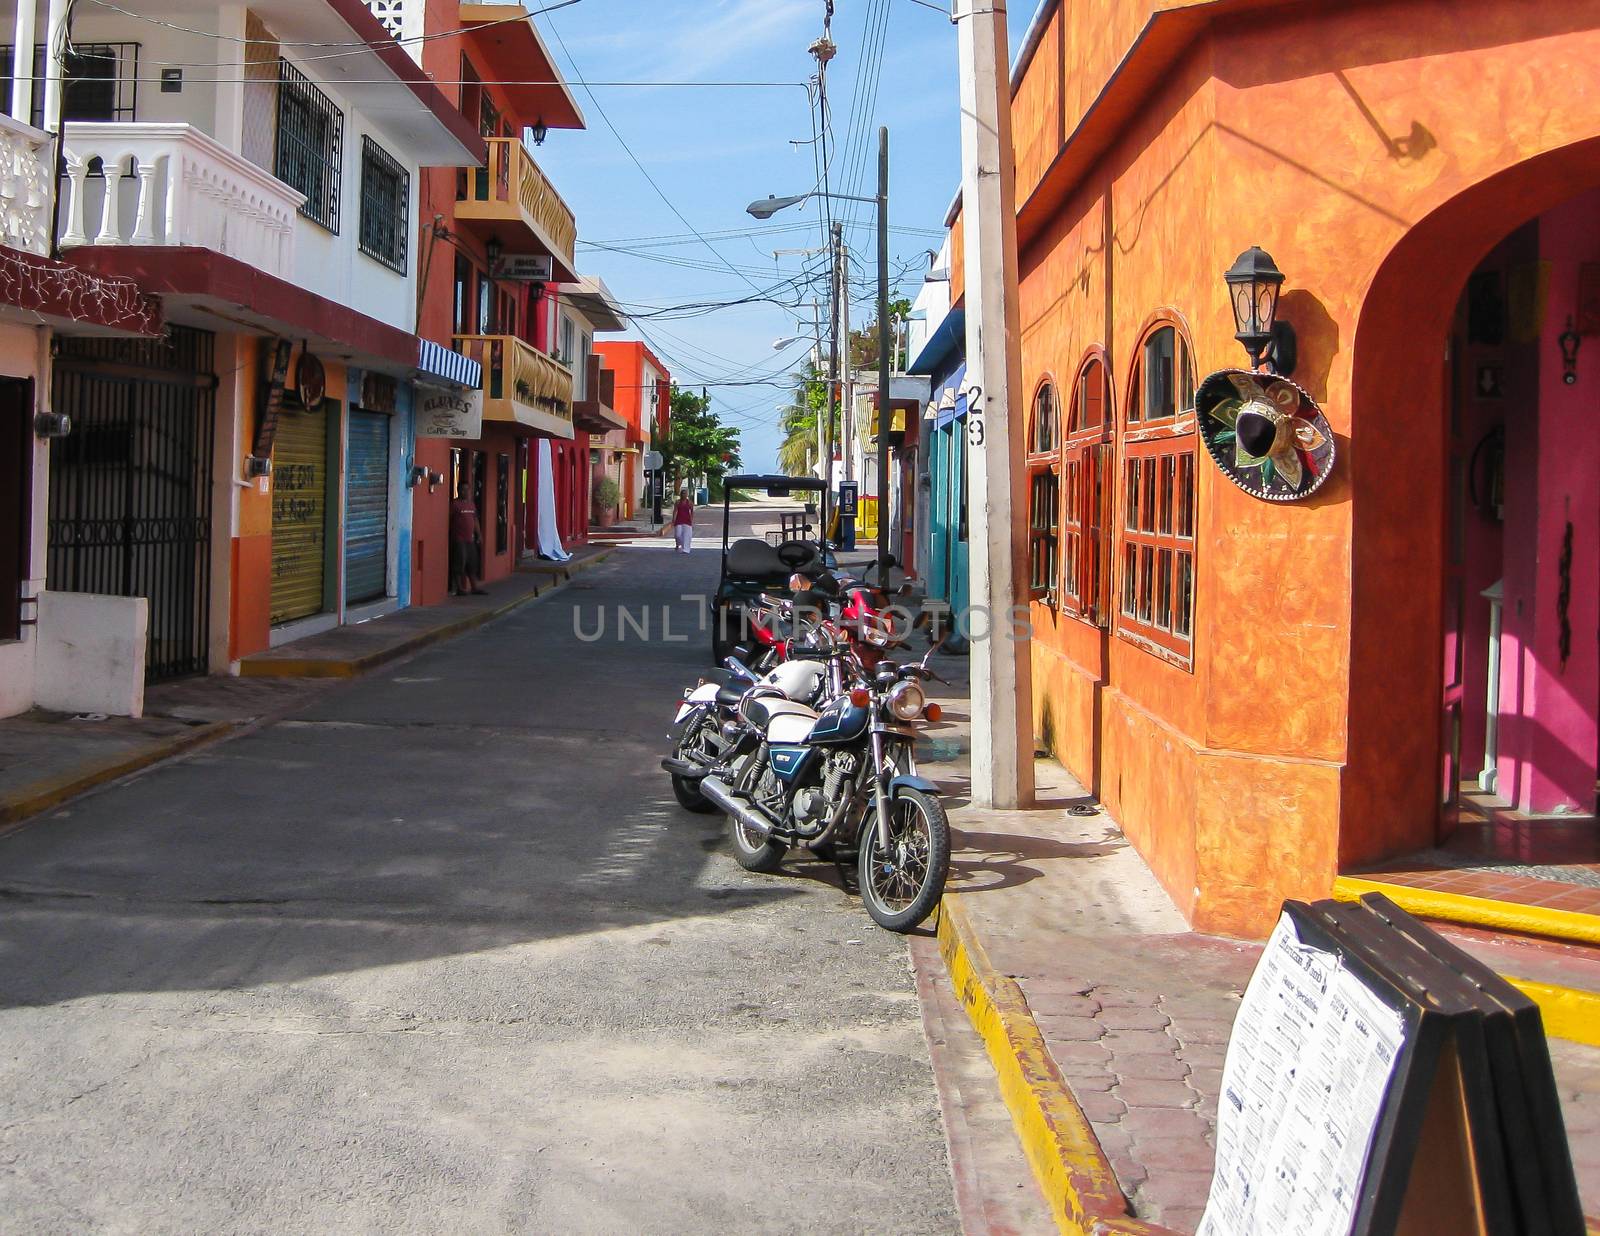 2008, Photo taken on: June 22nd, Street scene with narrow streets, vendors and colorful shops and businesses.